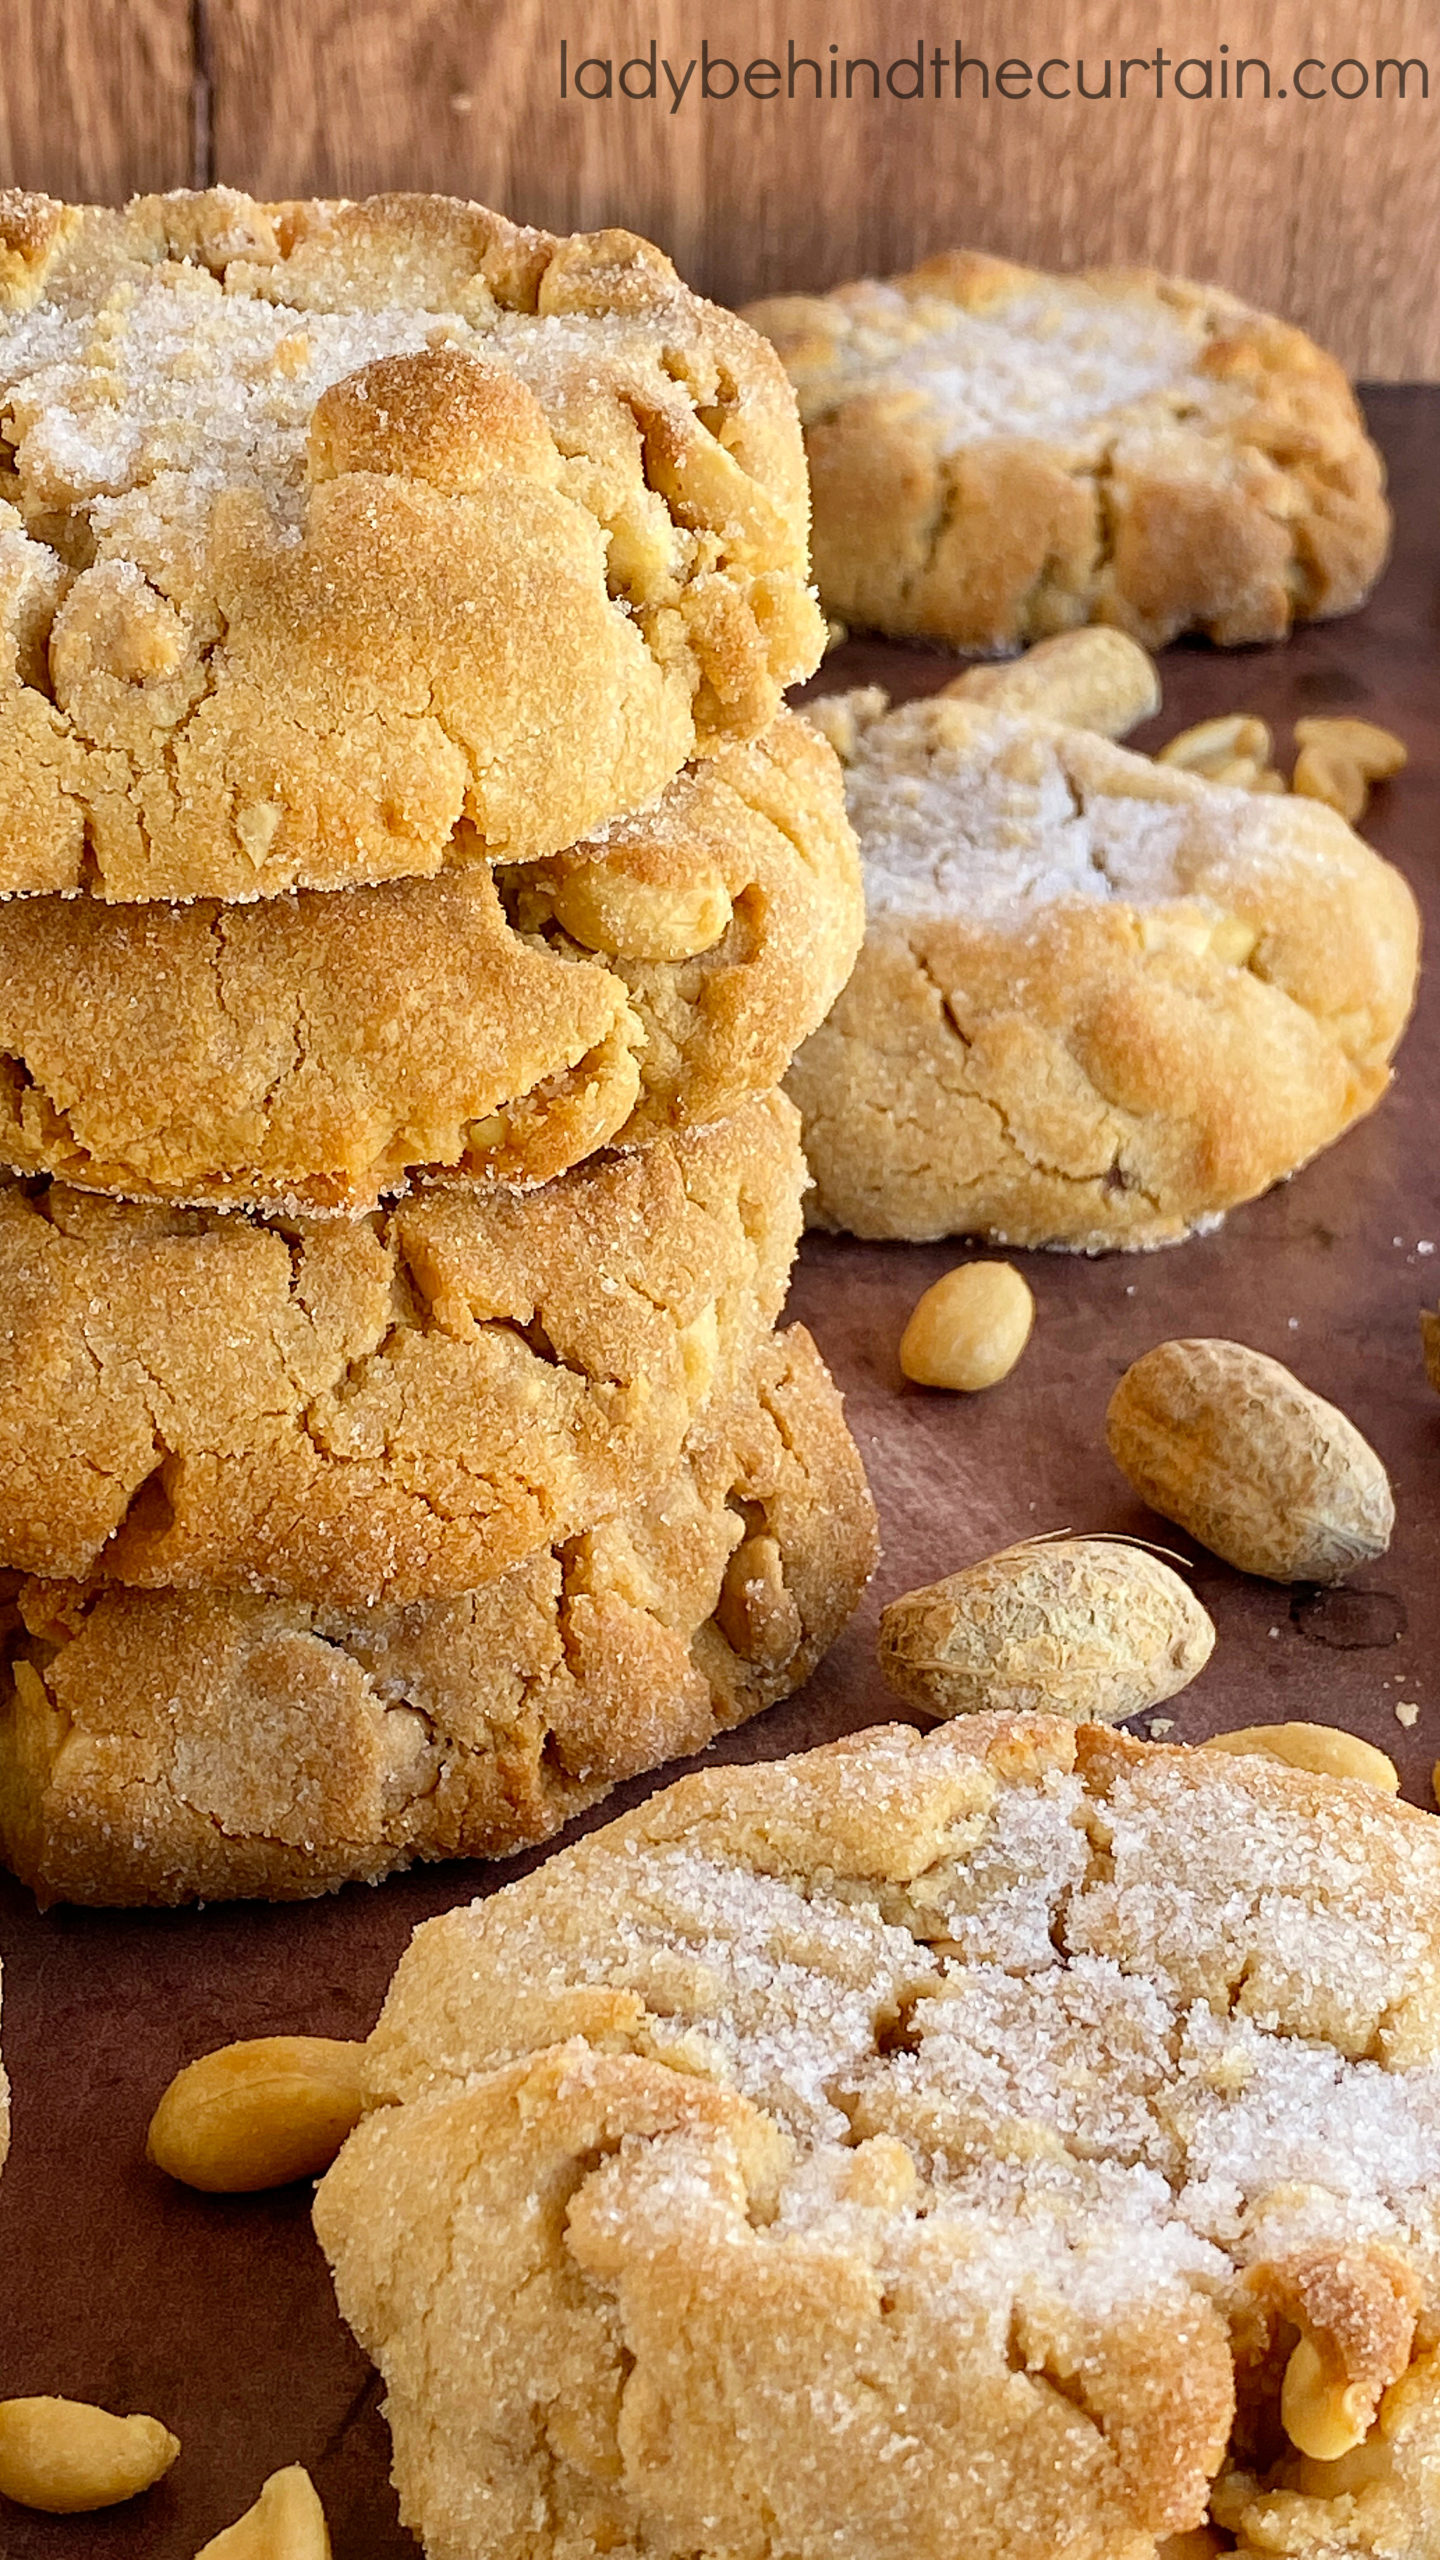 https://www.ladybehindthecurtain.com/wp-content/uploads/2022/12/Gourmet-Thick-Peanut-Butter-Cookies-4-scaled.jpg